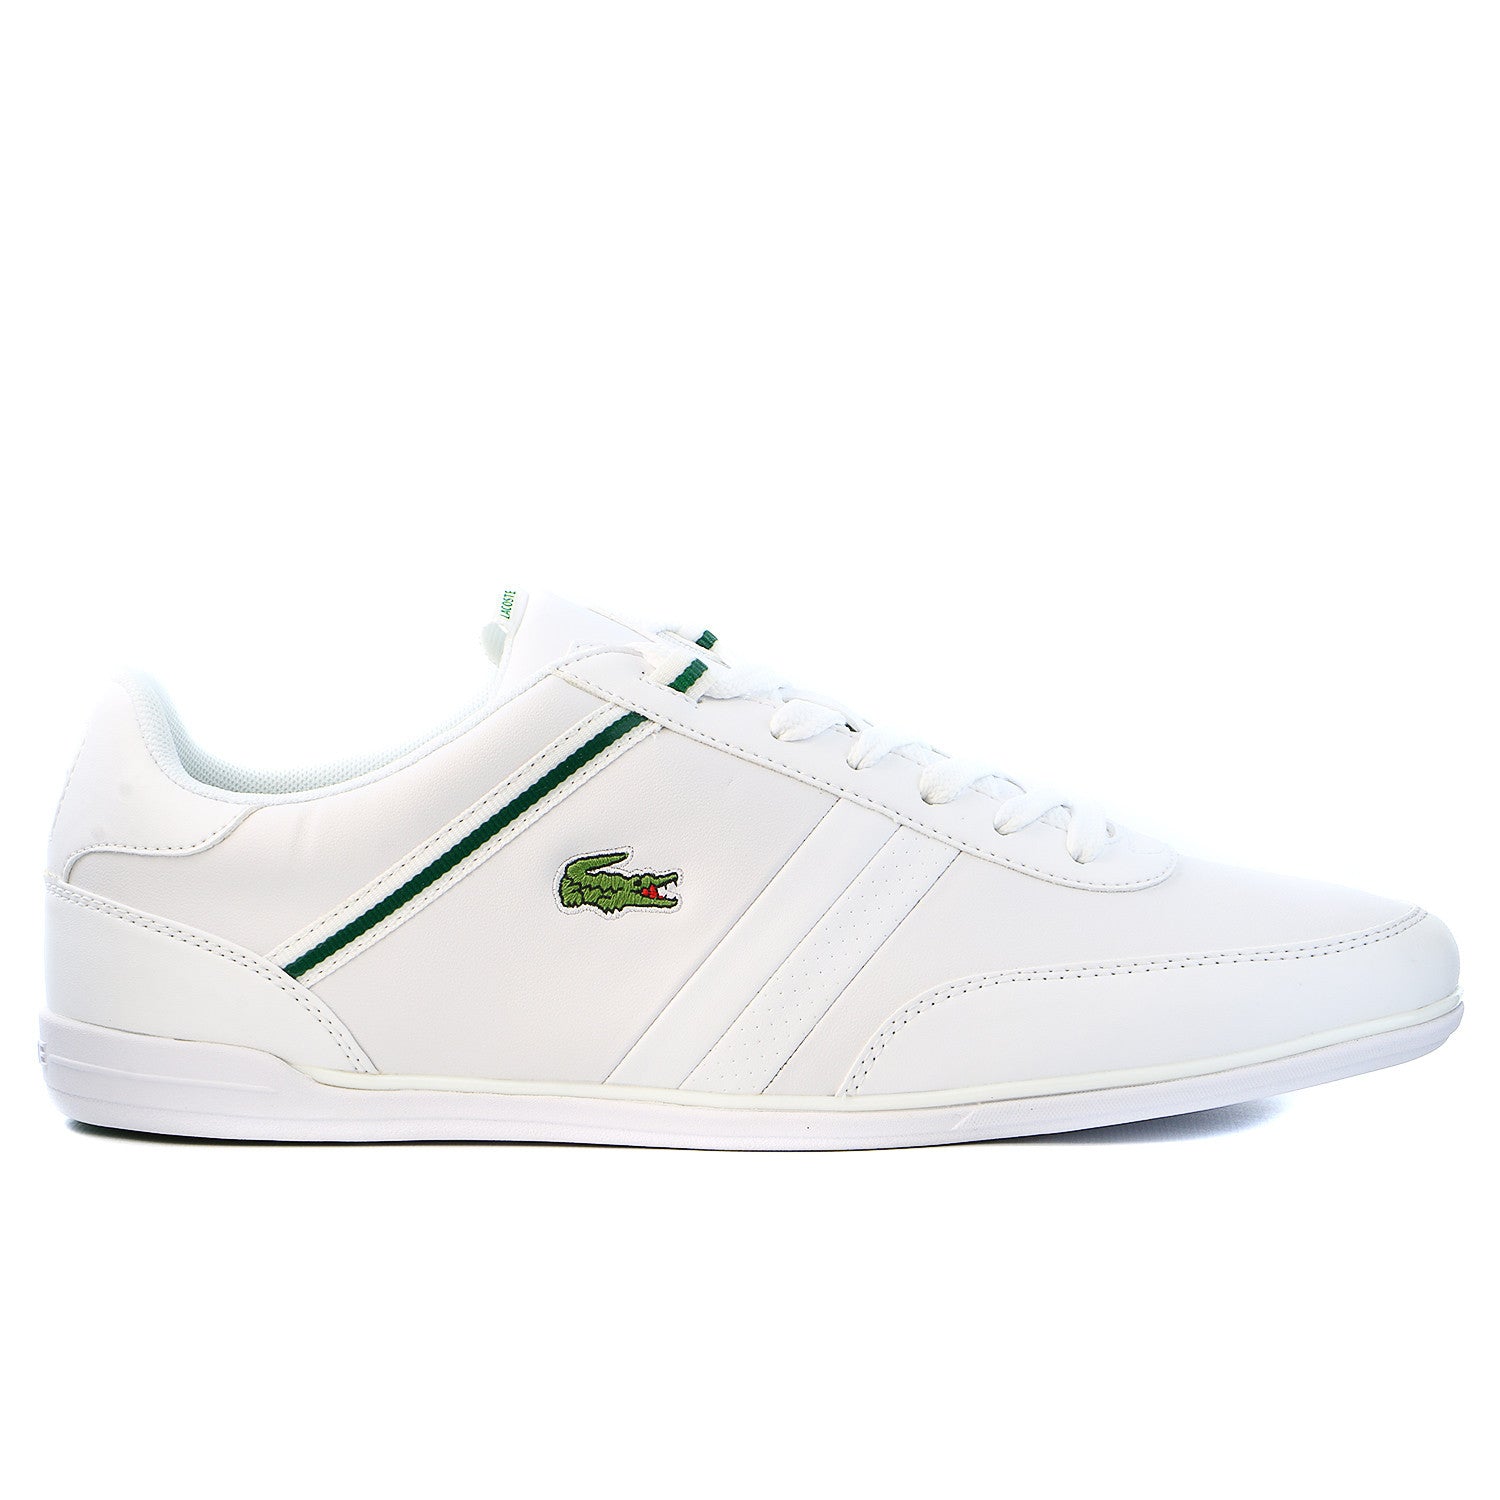 lacoste shoes white and green